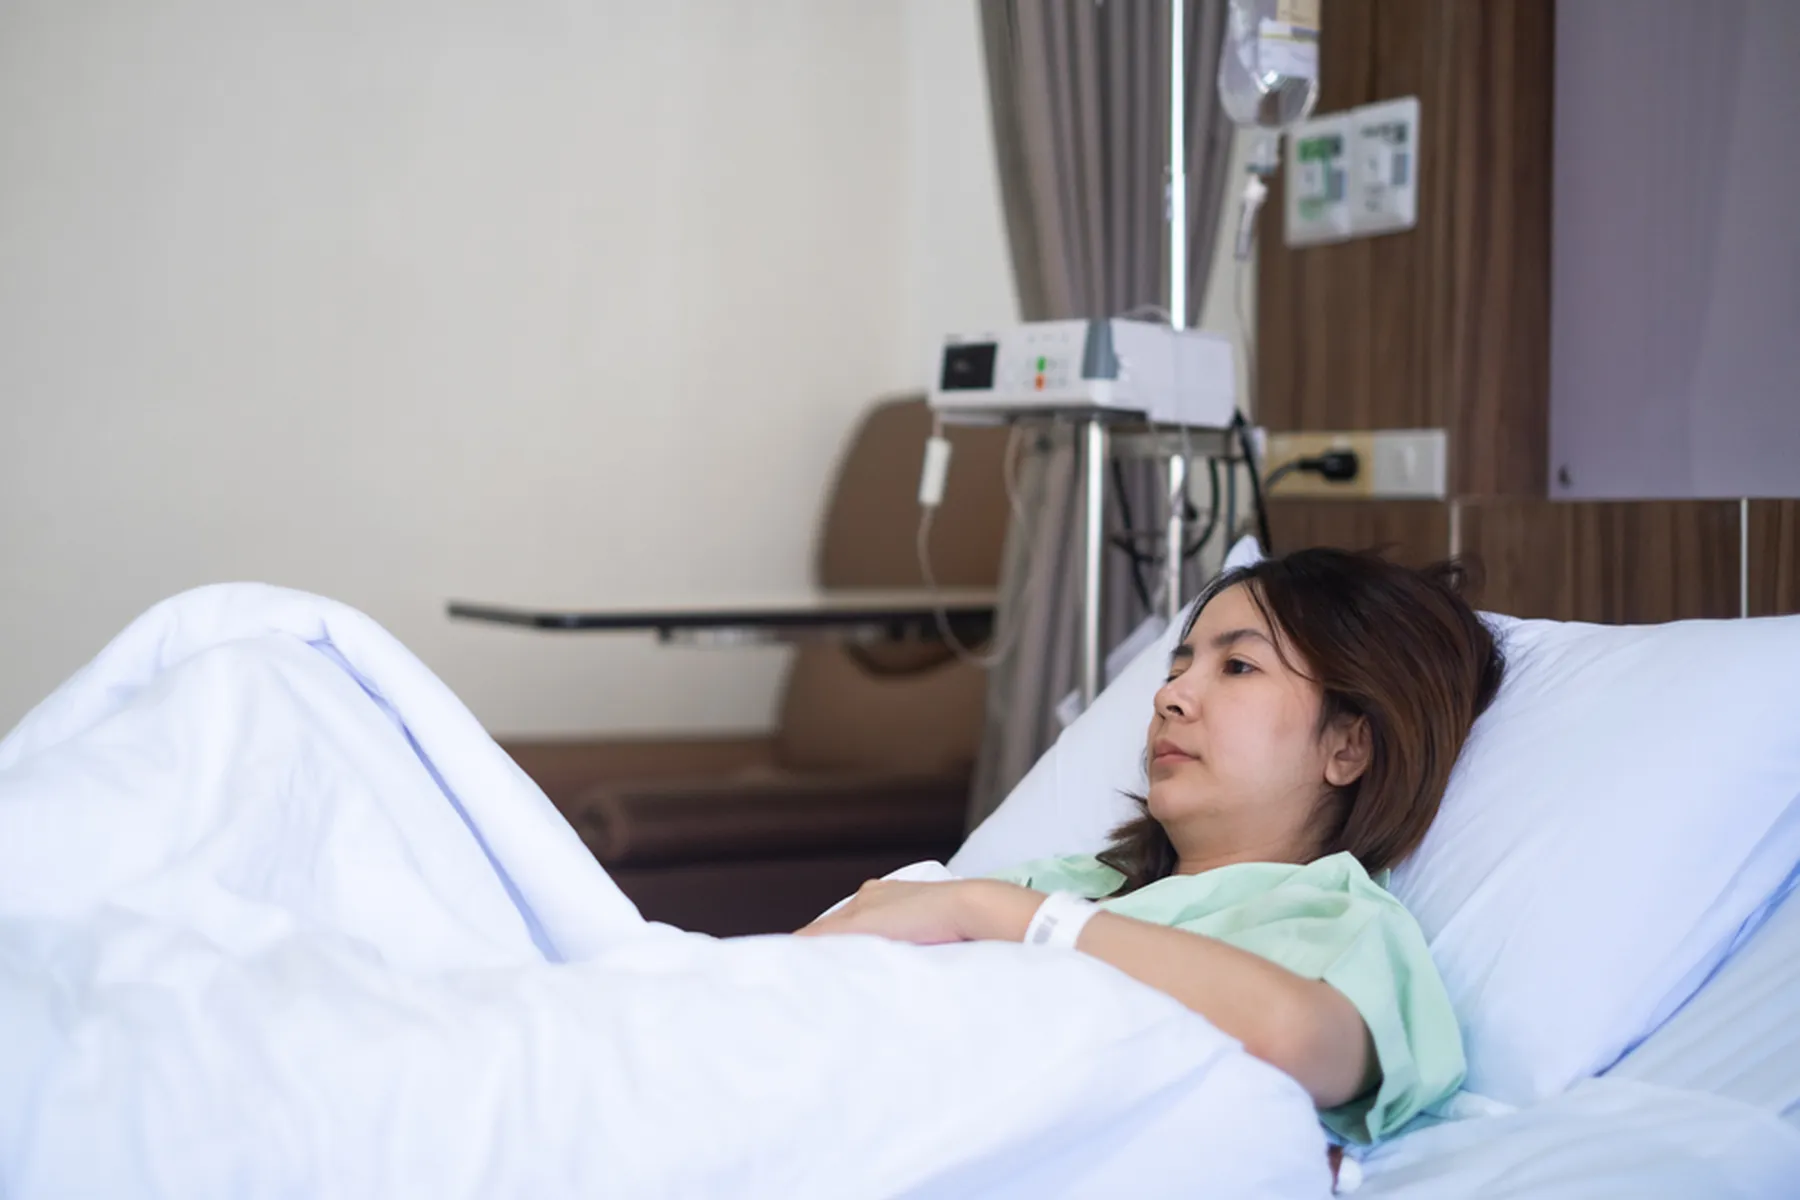 A woman in a hospital gown lays in a hospital bed.